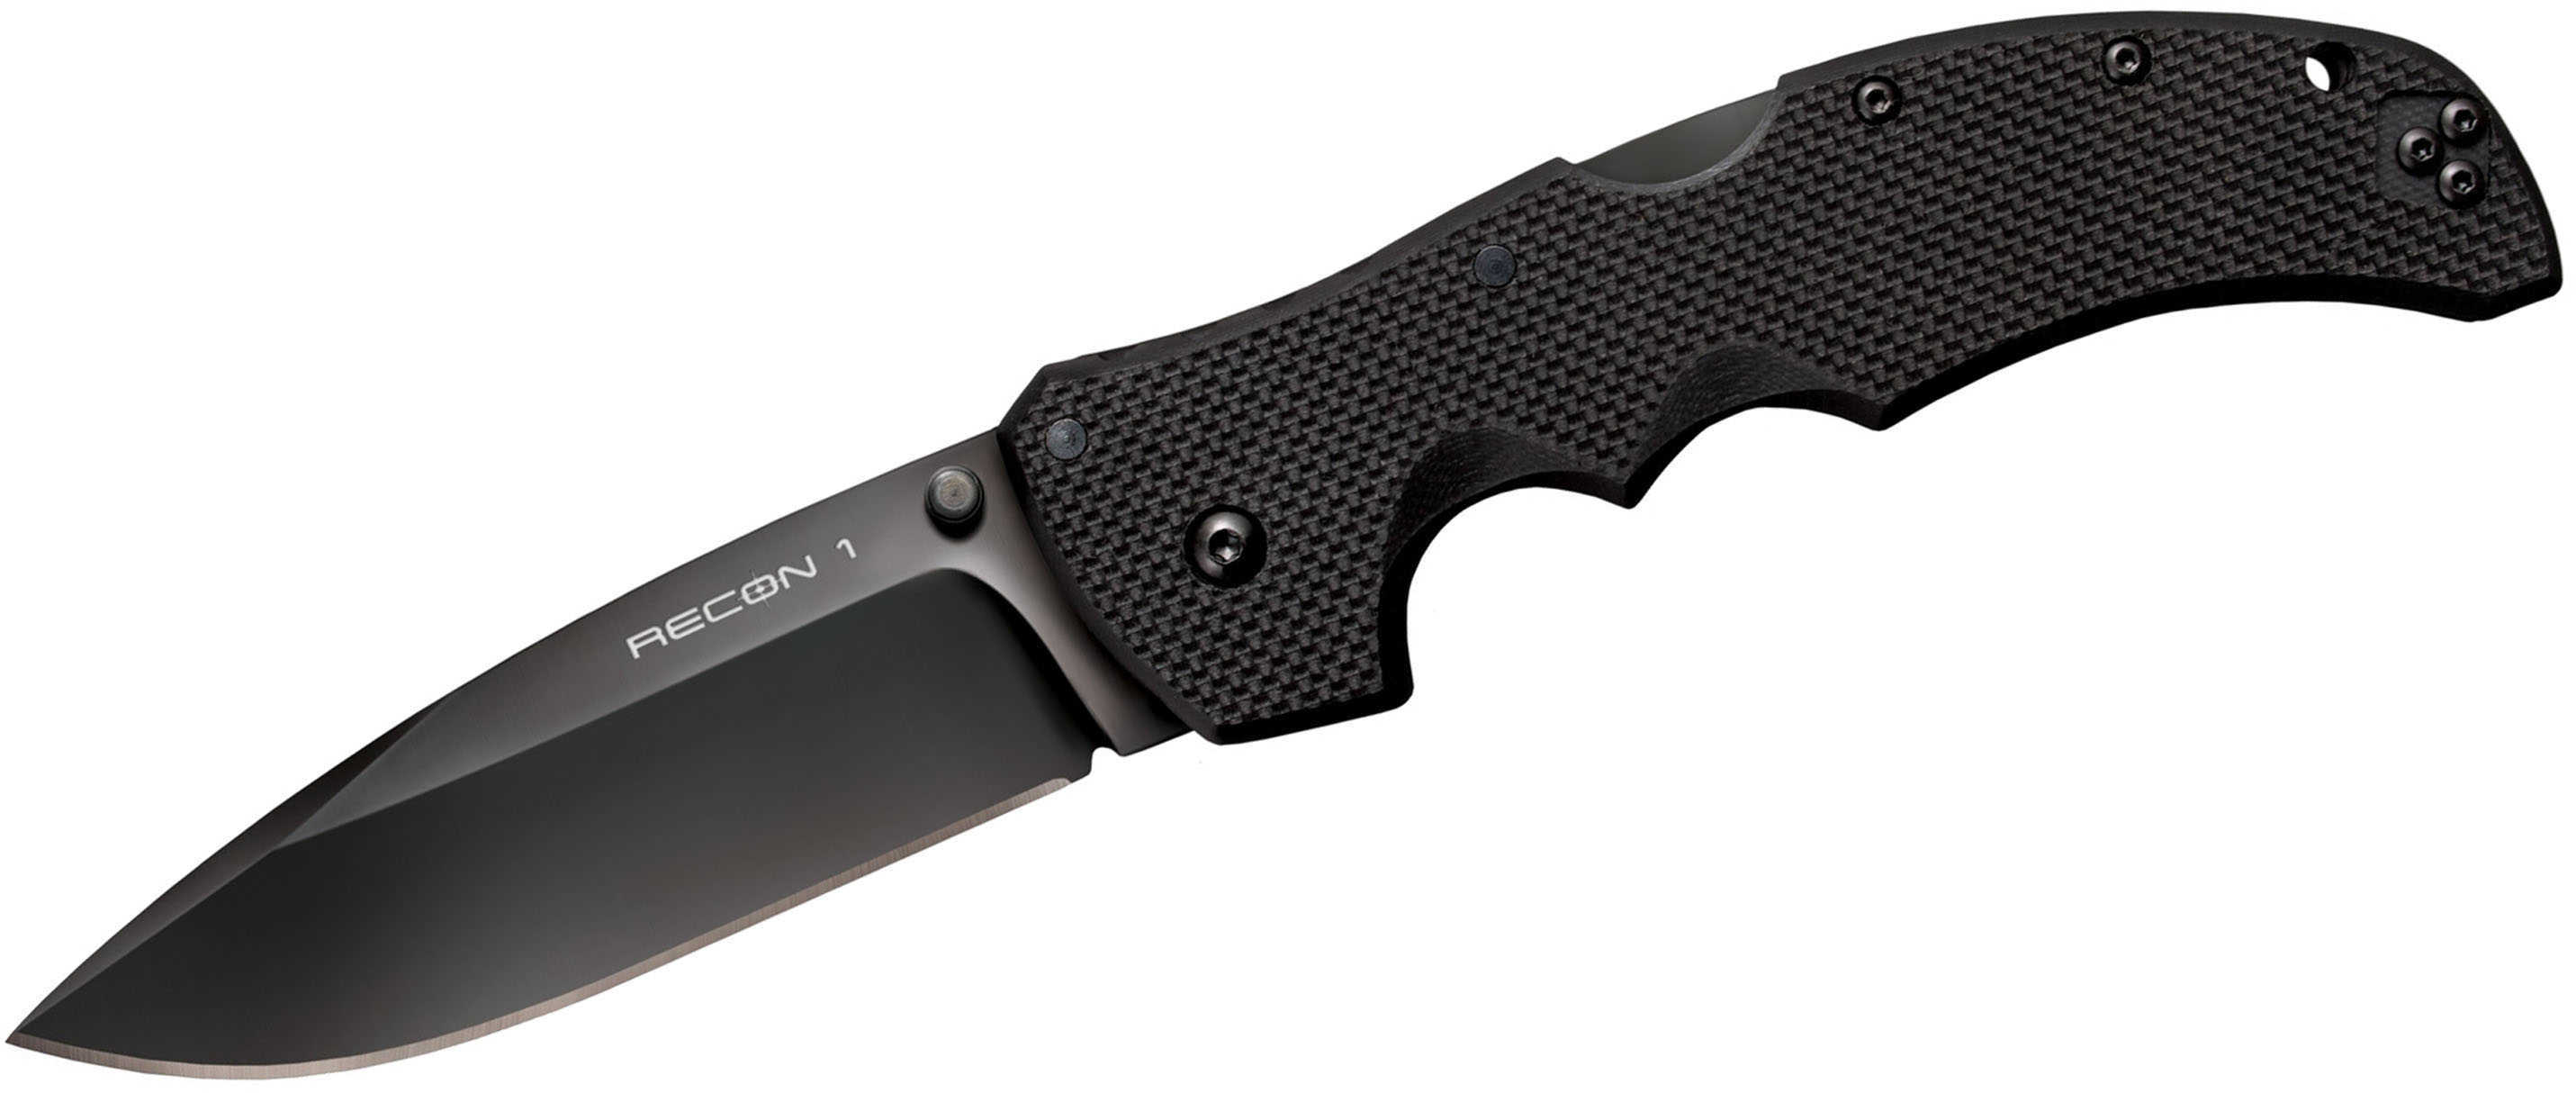 Cold Steel Recon 1 Spear Point, Plain Edge